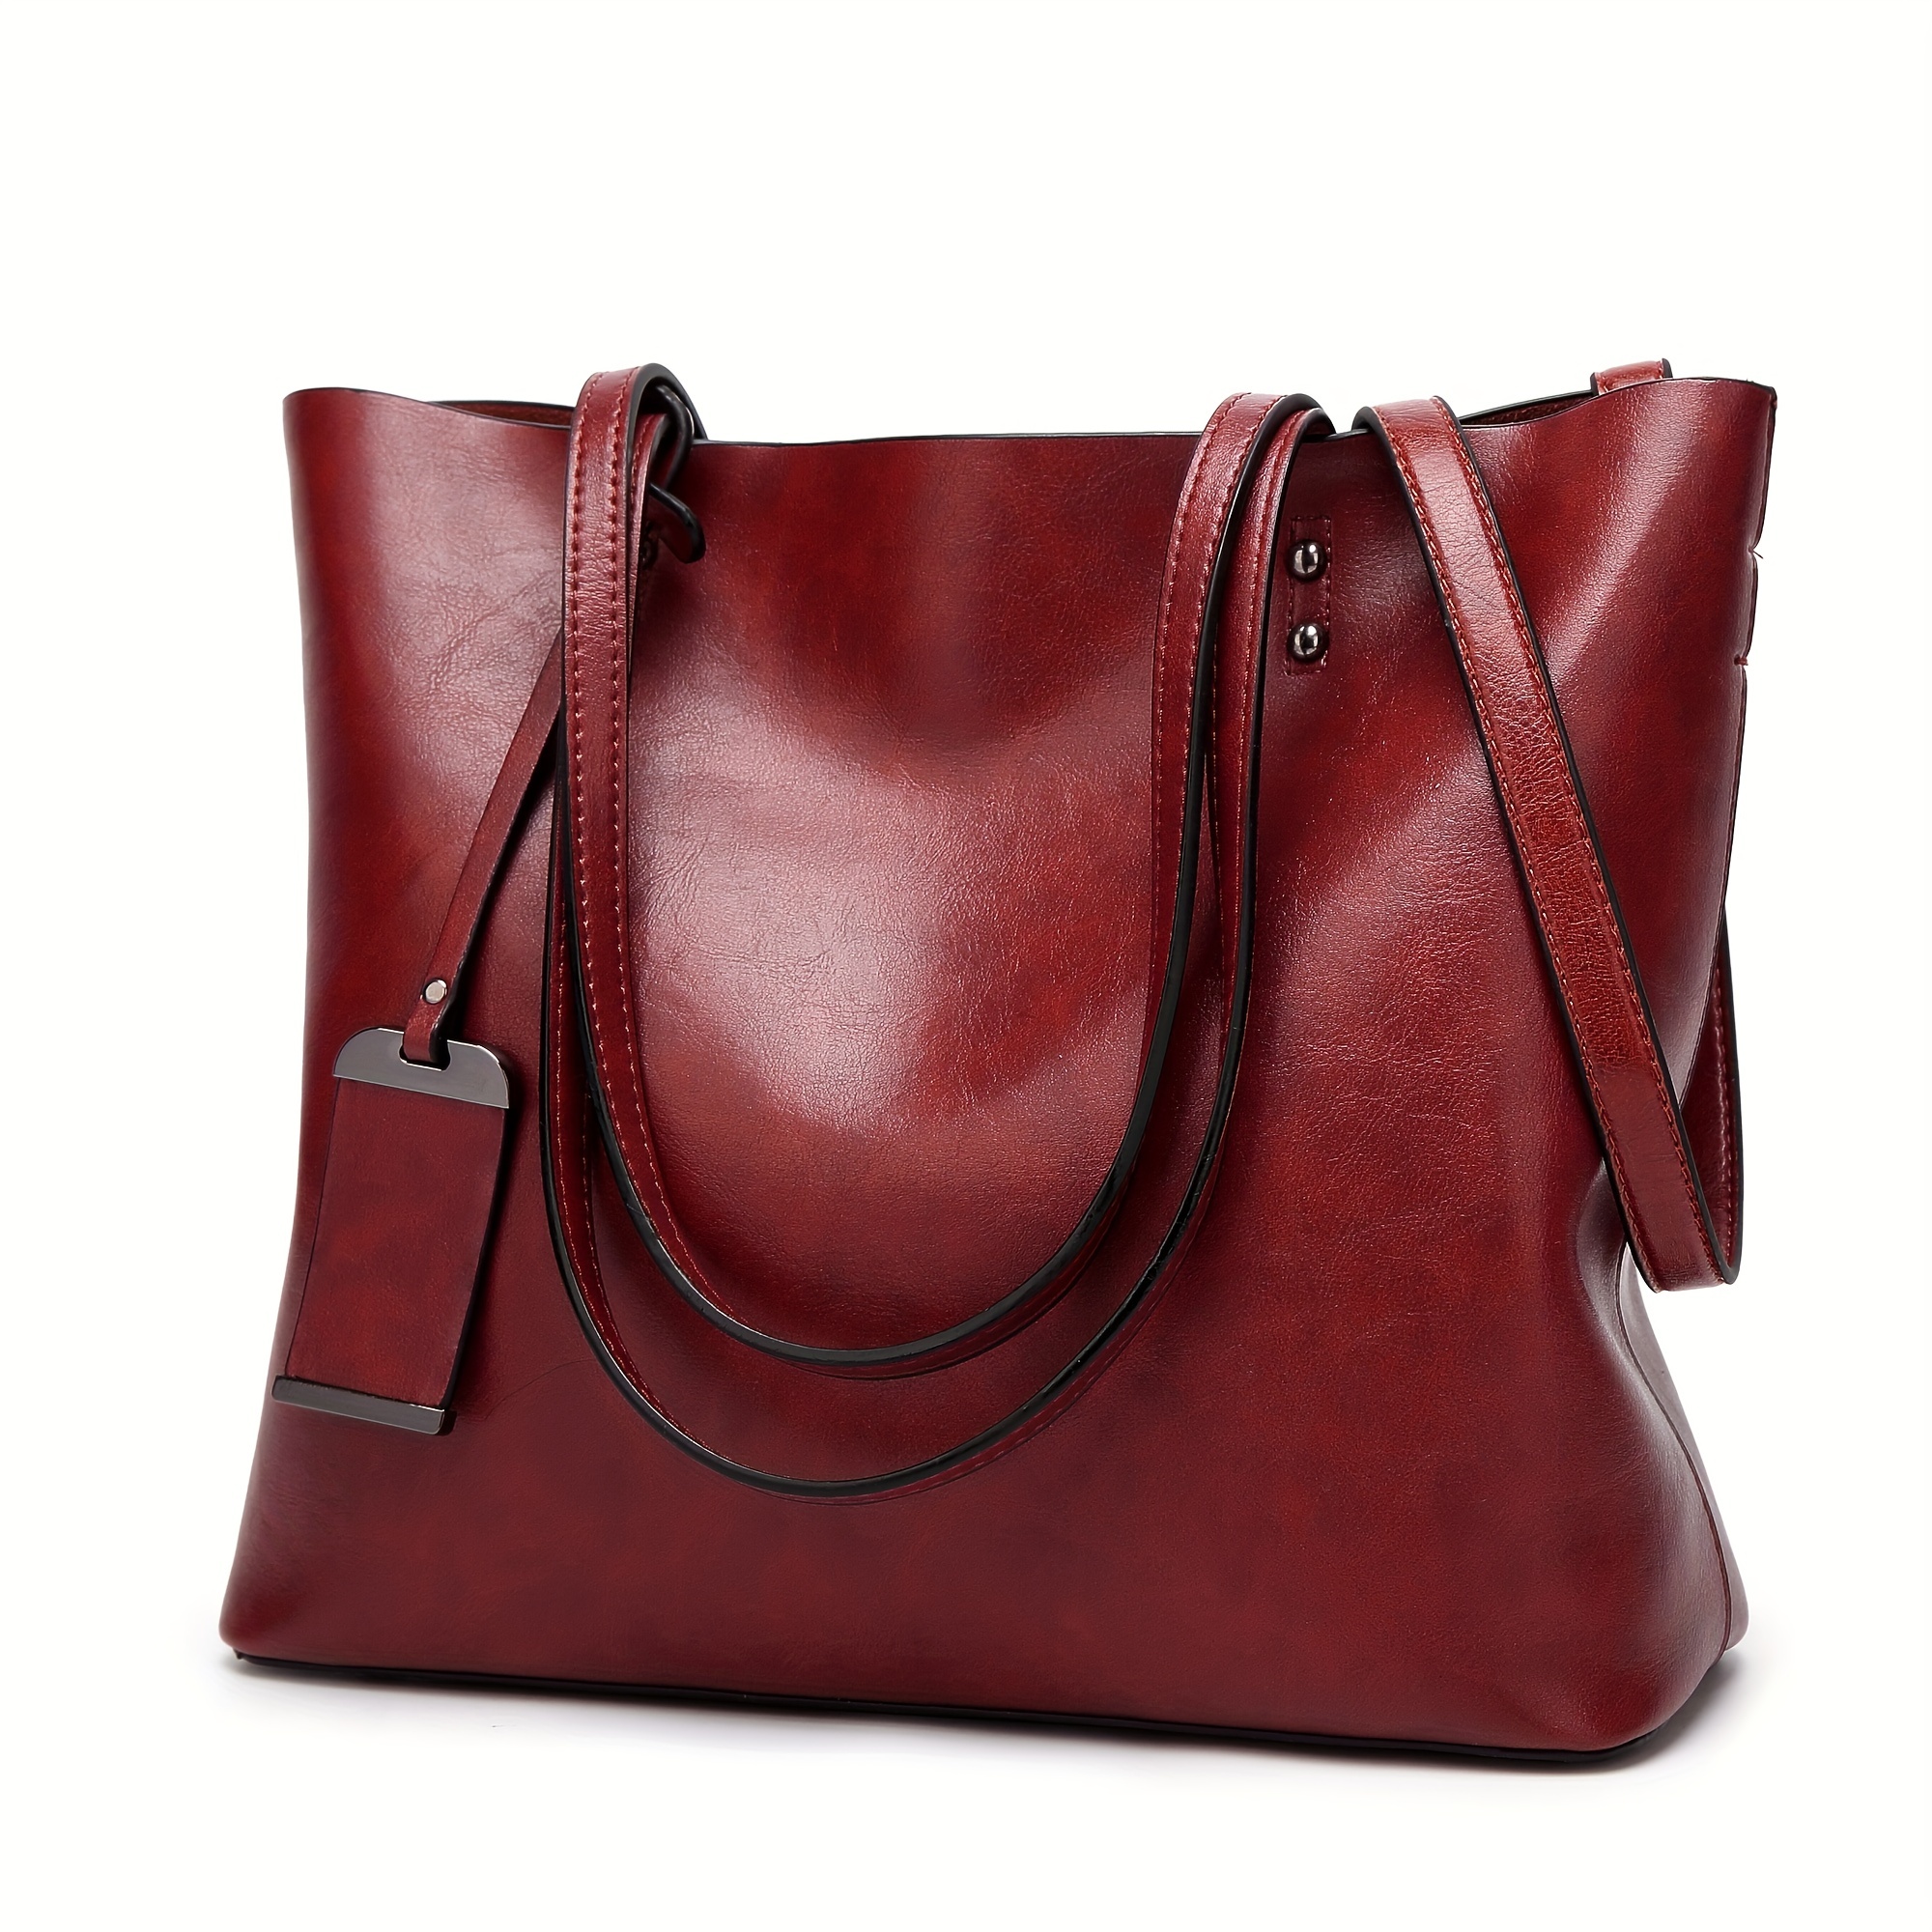 TappooCity - Shopping, Food, Fun & Entertainment for the Entire Family - A  larger-than-life essential, this faux-leather tote bag features dual  shoulder straps and an all over logo print with contrasting stripe